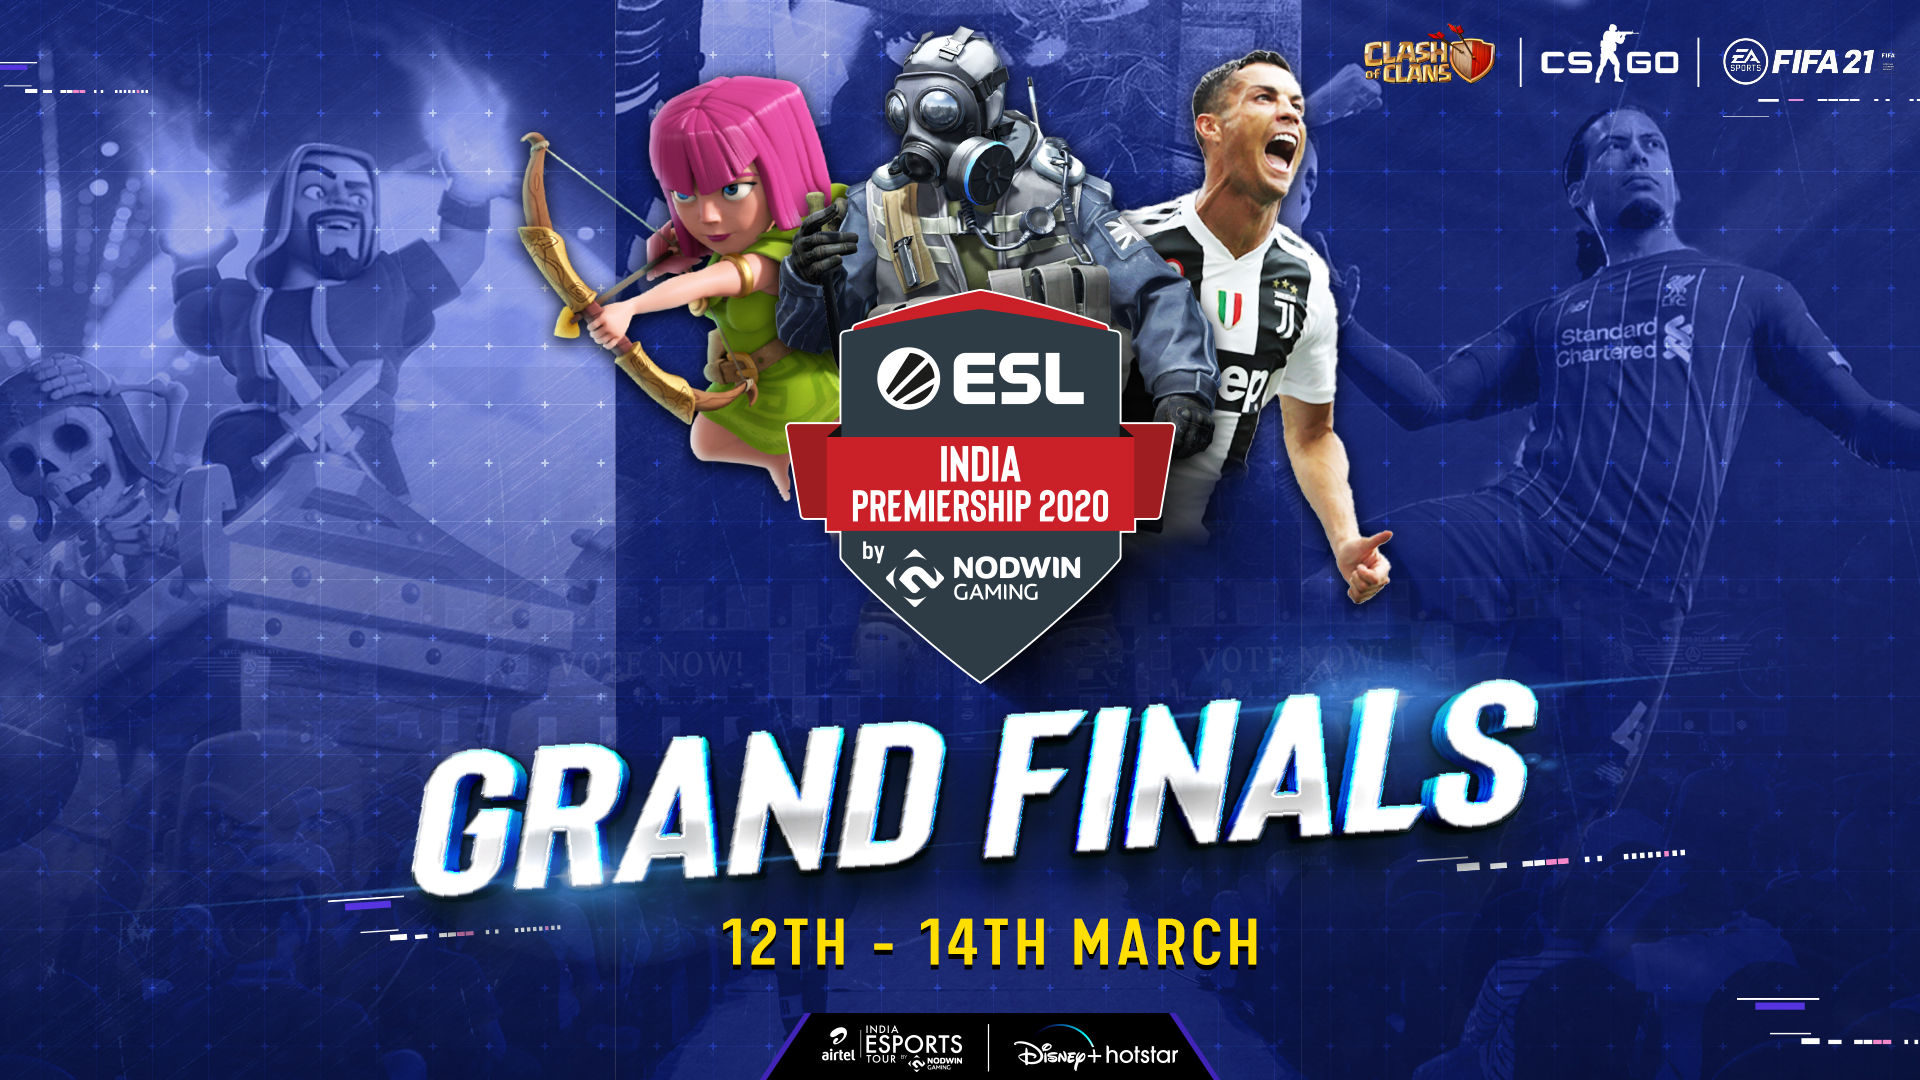 Grand Finale of the Winter Season of NODWIN Gaming’s ESL India Premiership to Stream on Disney+Hotstar From March 12-14, 2021